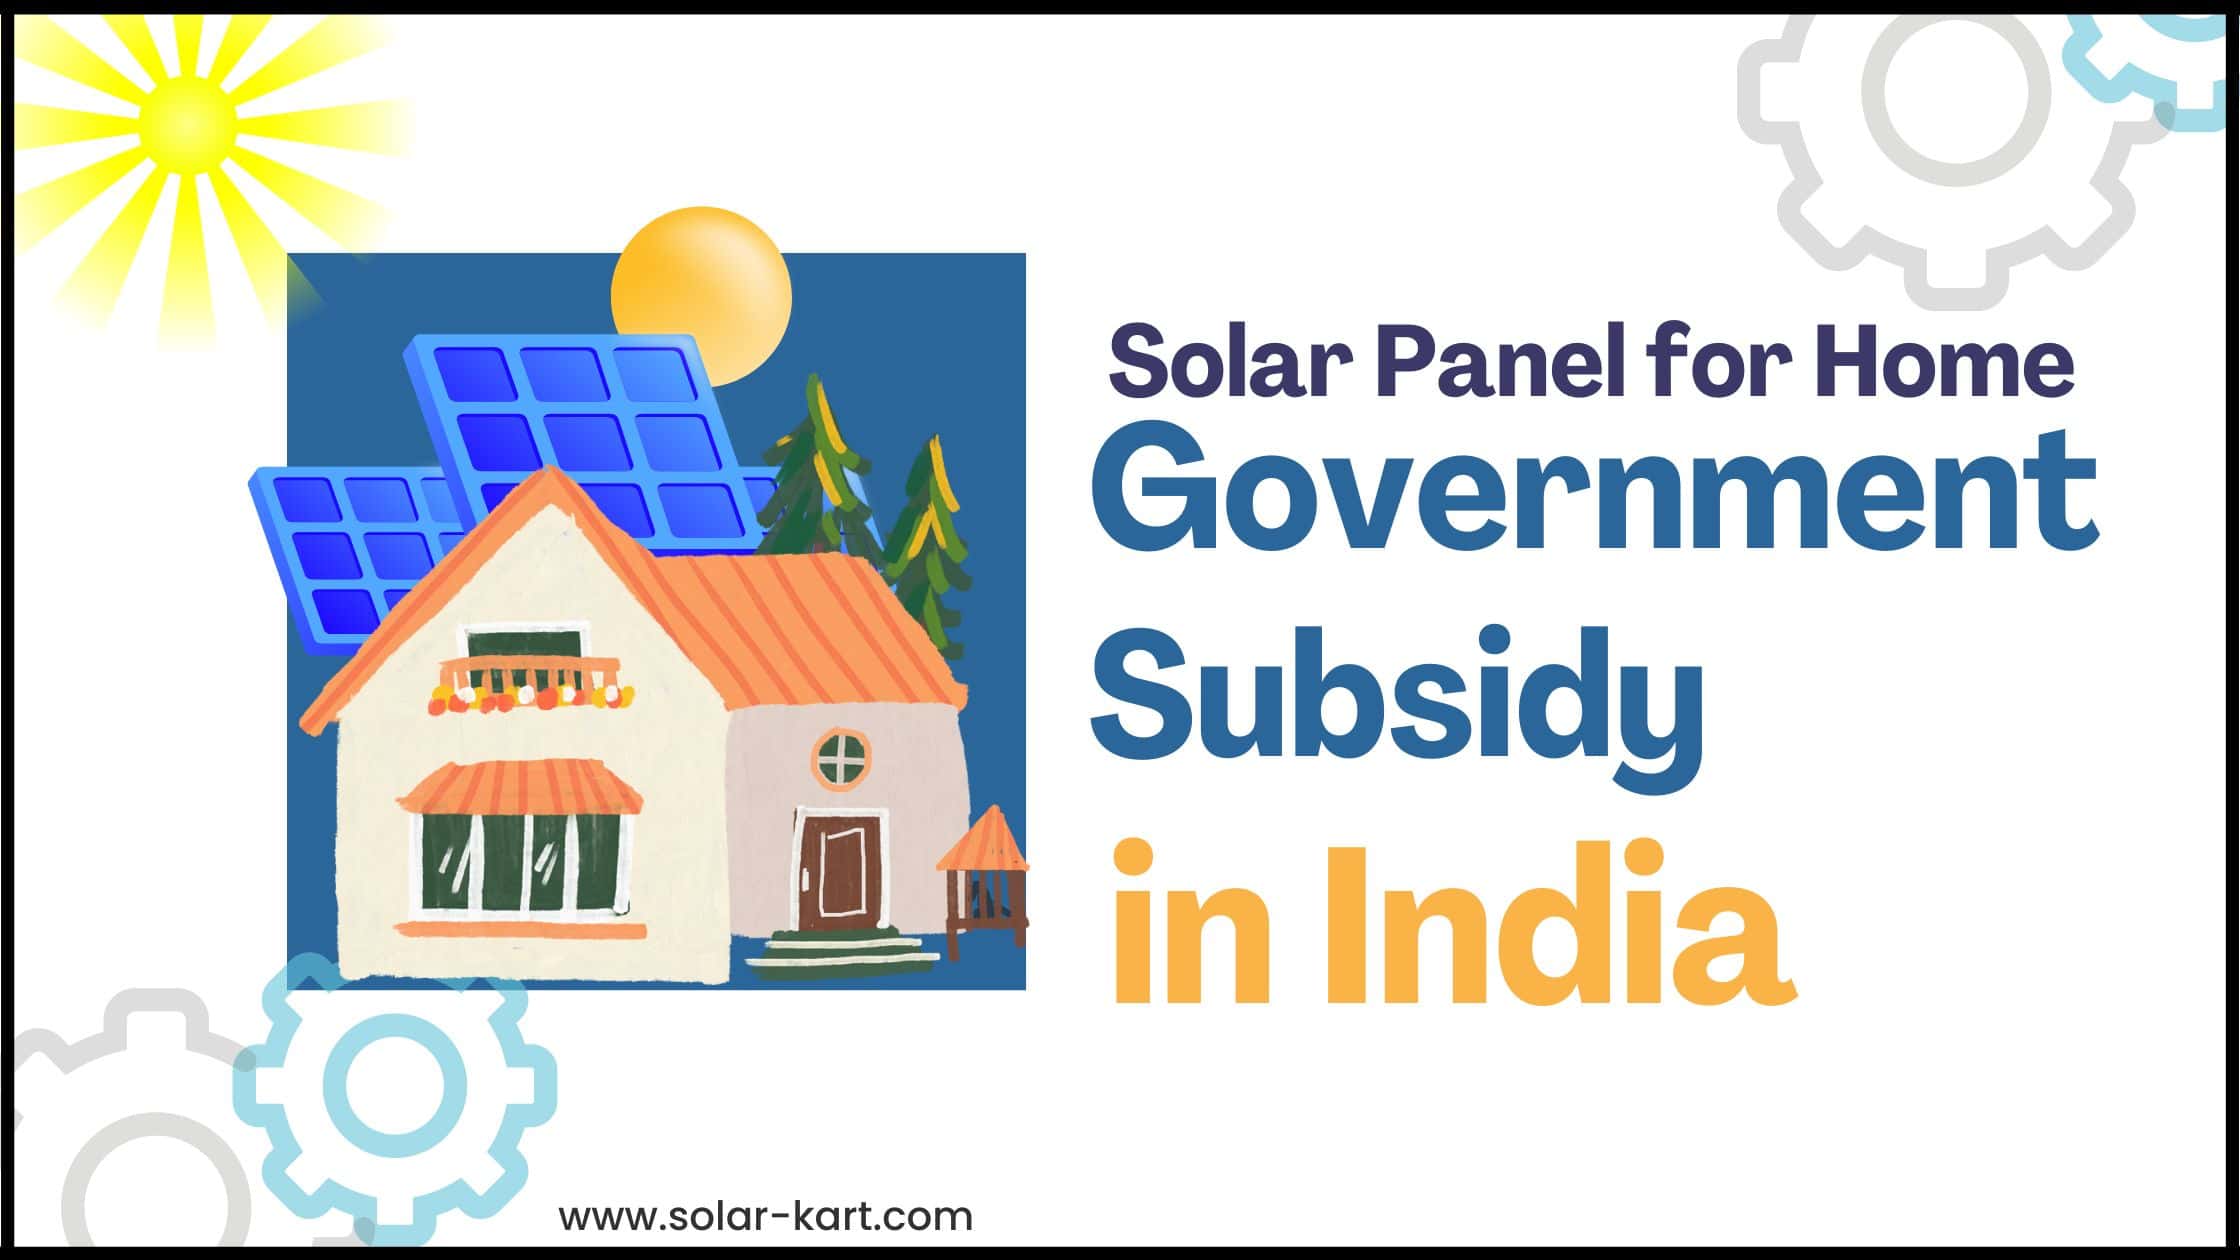 Solar Panel for Home: Government Subsidy in India